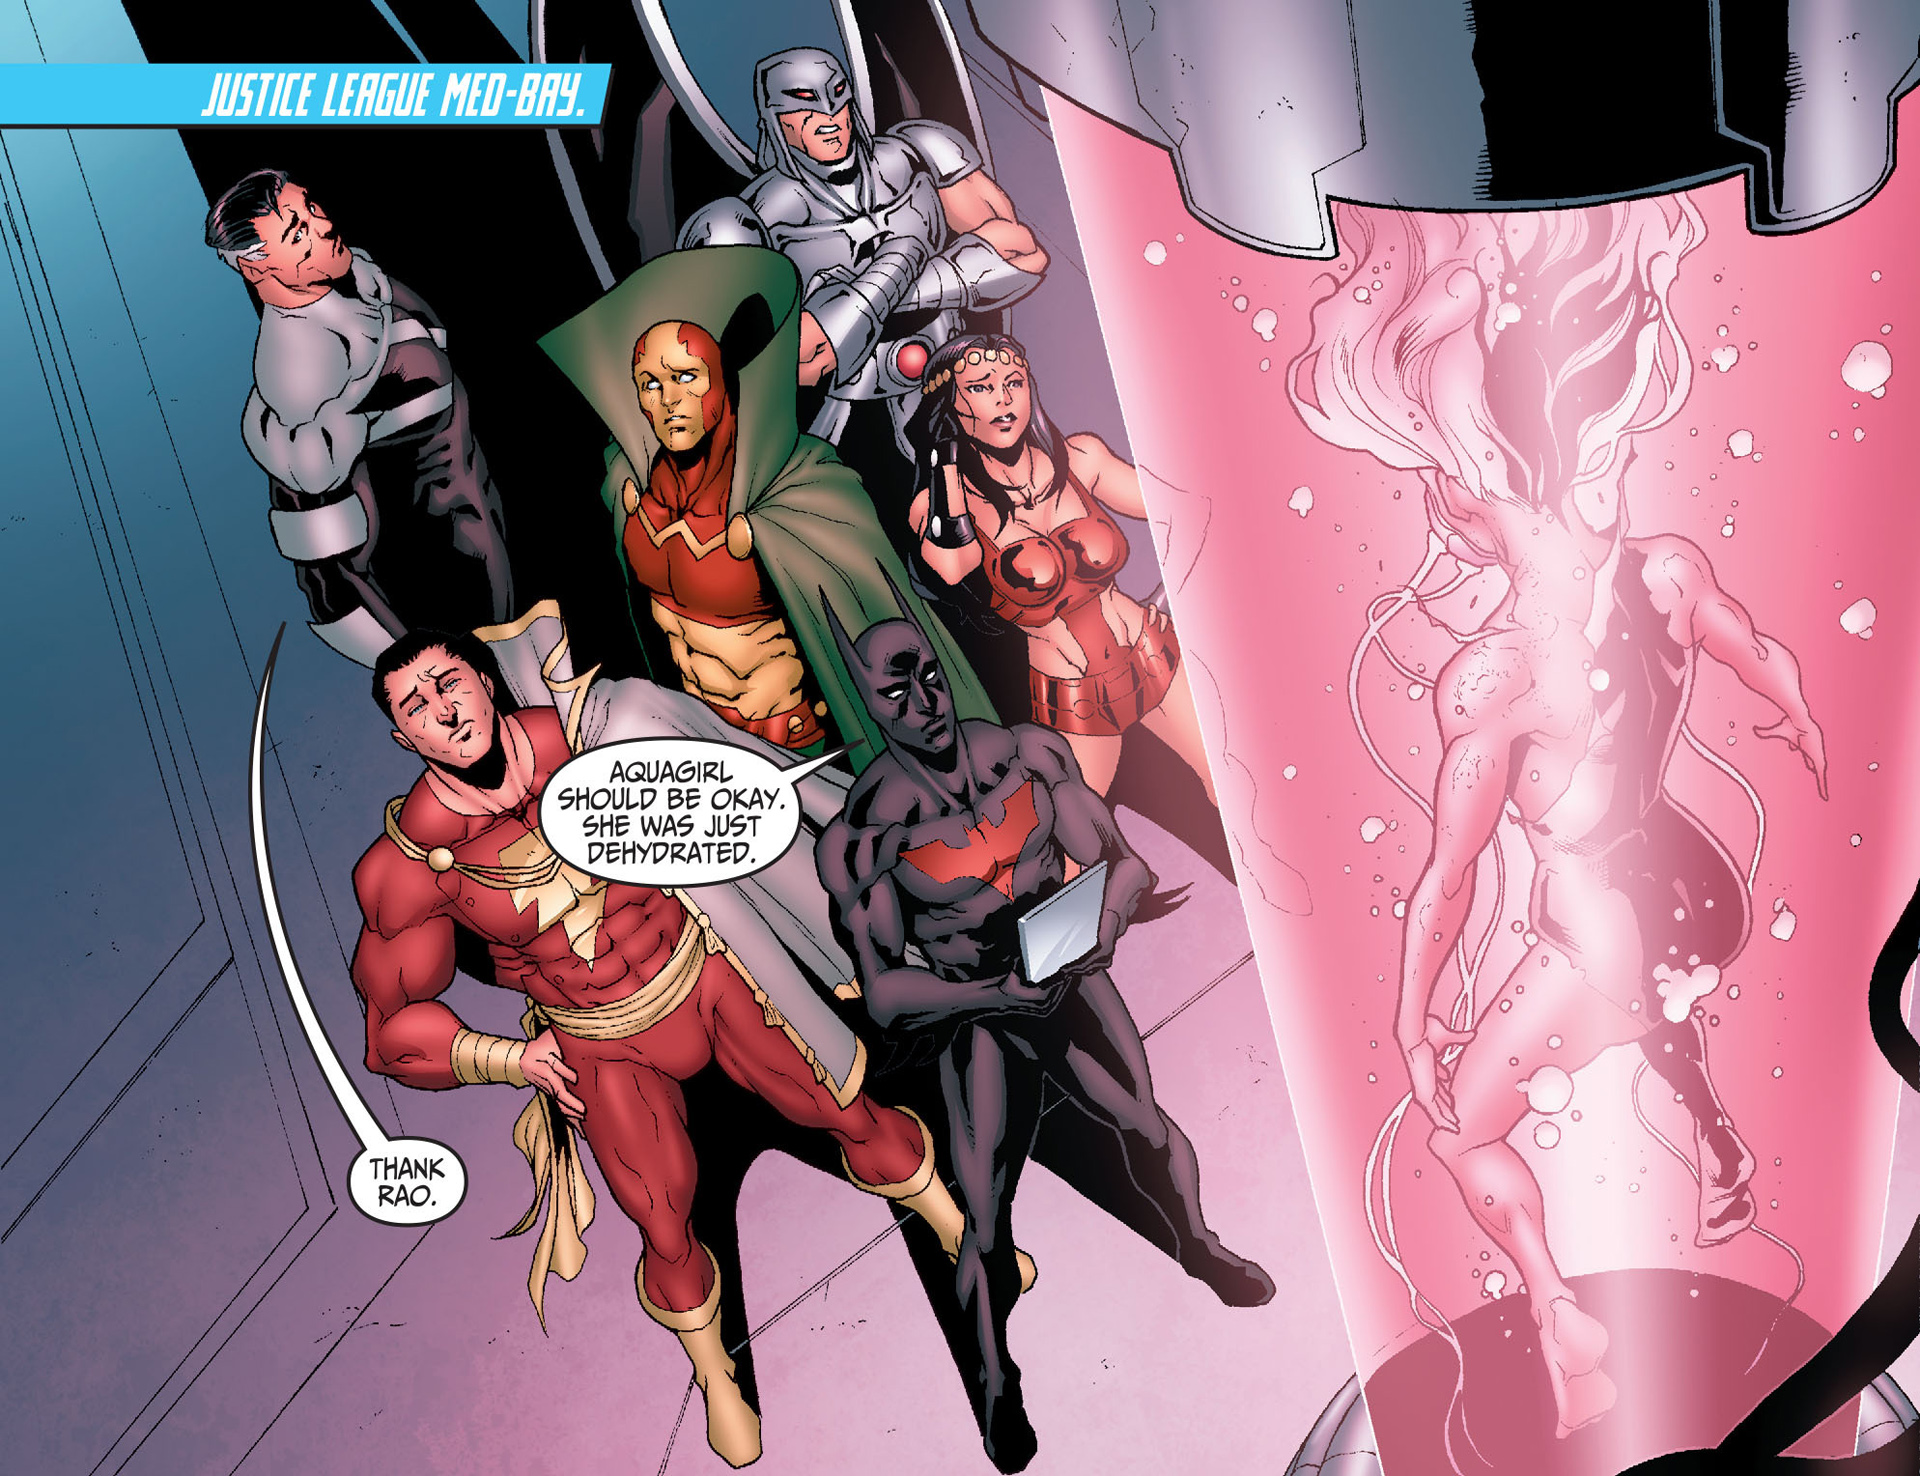 Justice League Beyond 2 0 Issue 2 | Read Justice League Beyond 2 0 Issue 2  comic online in high quality. Read Full Comic online for free - Read comics  online in high quality .|